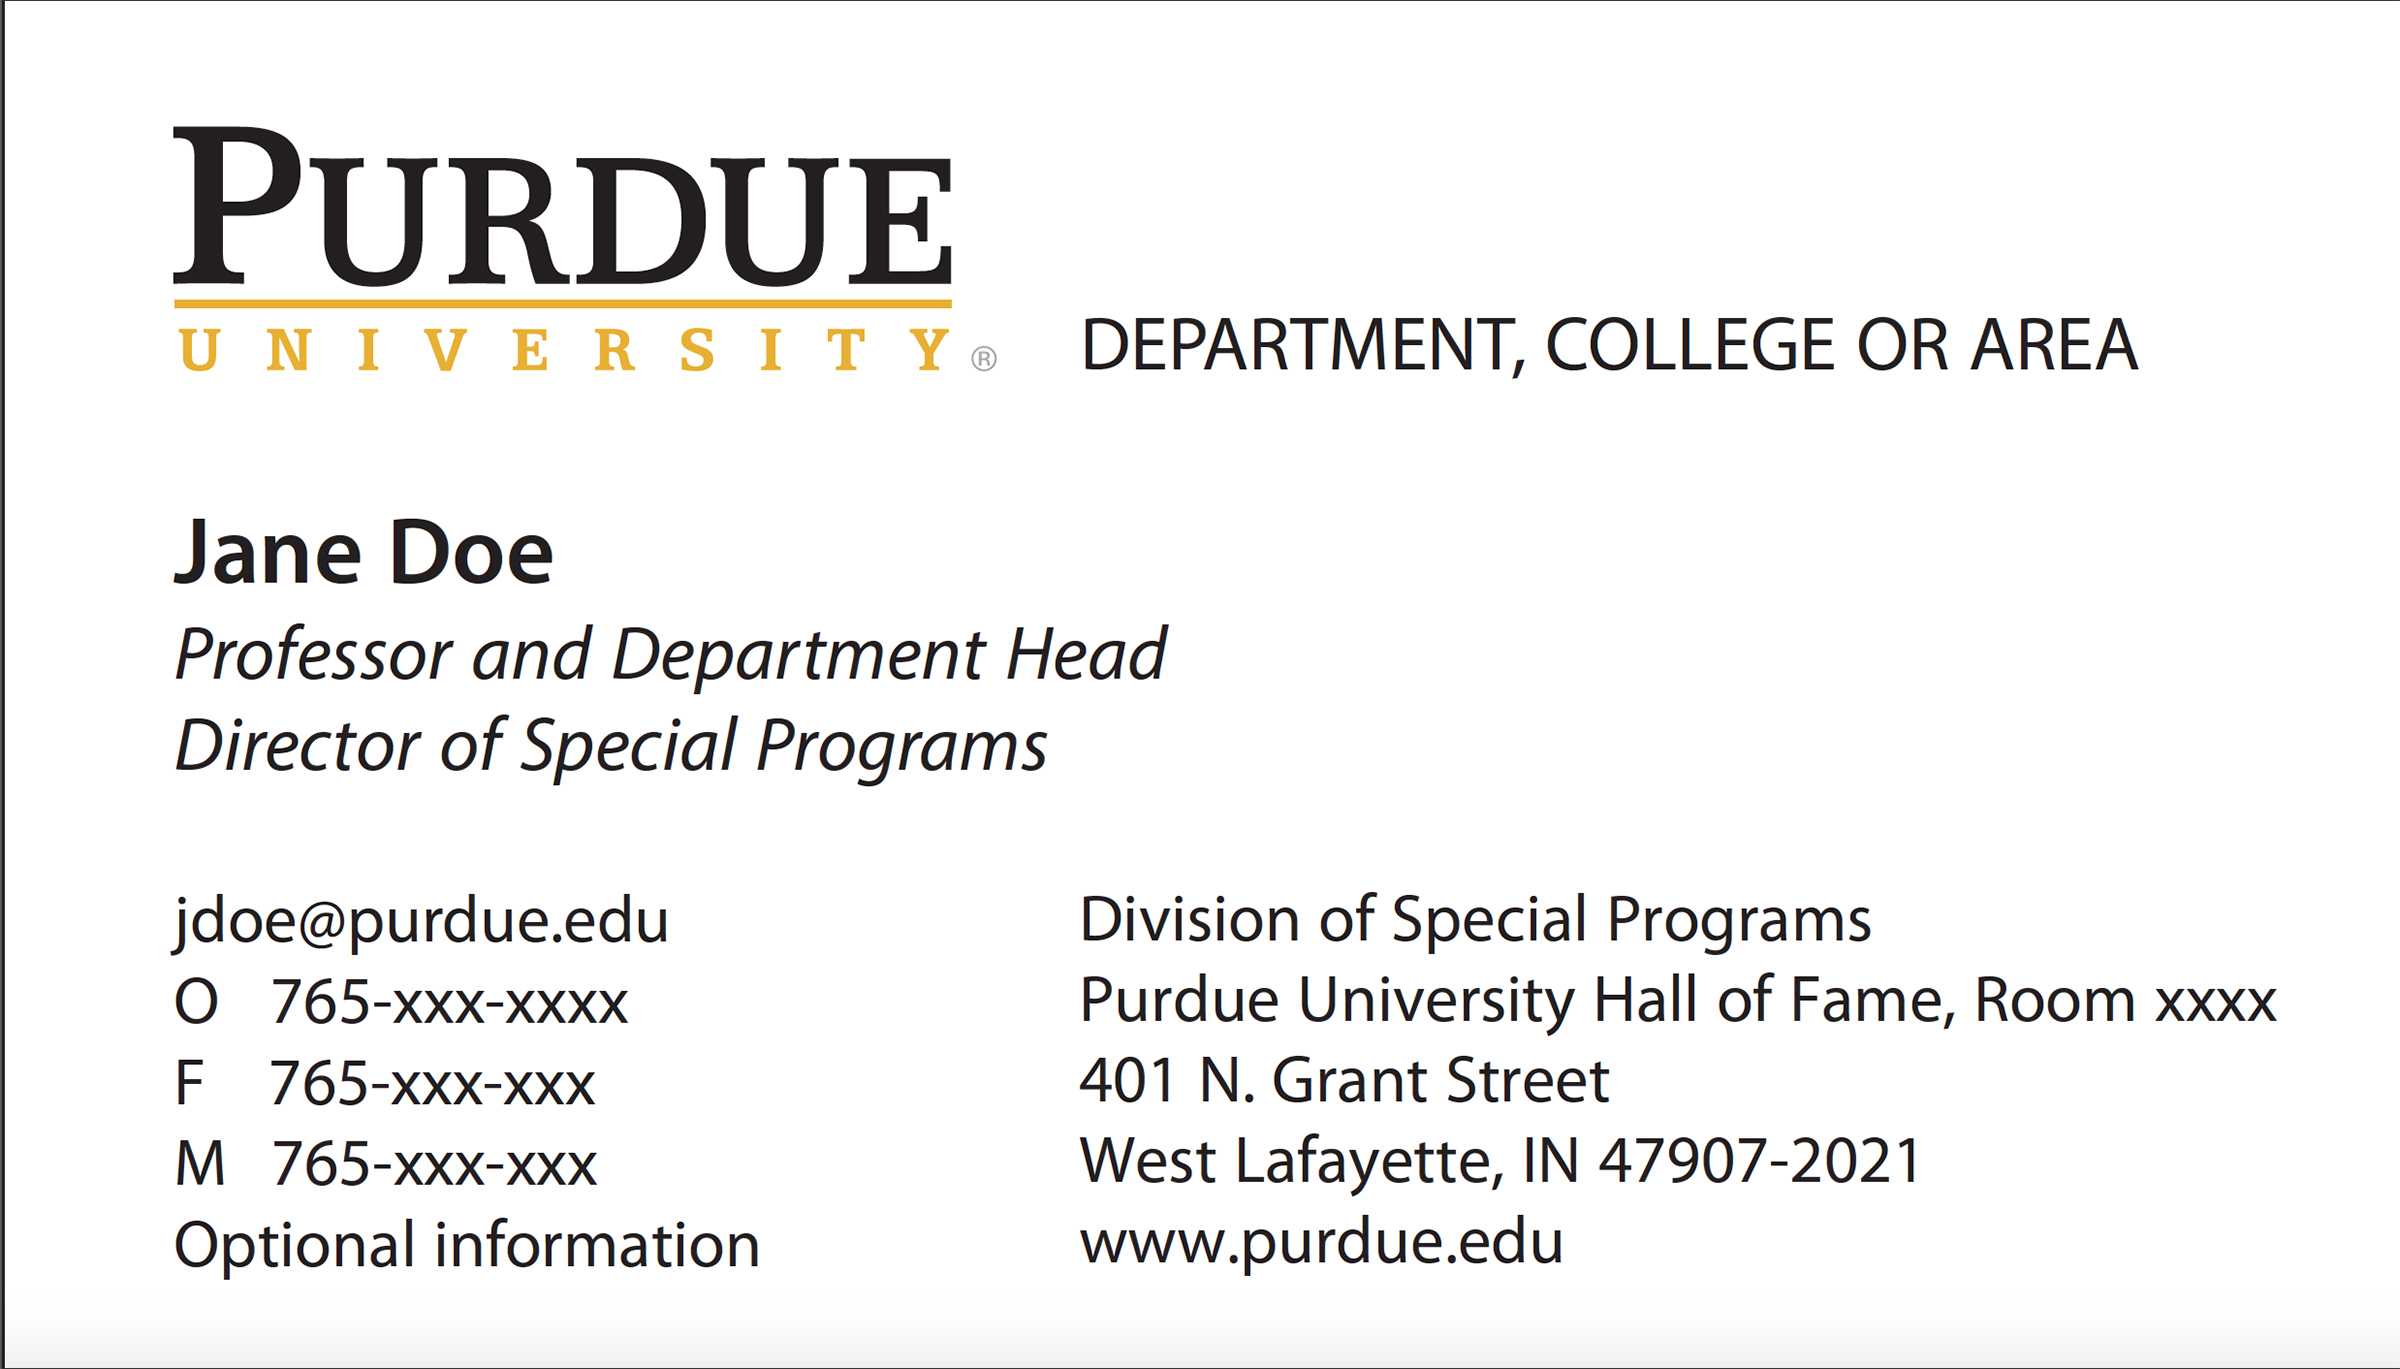 New Business Card Template Now Online – Purdue University News Within Student Business Card Template